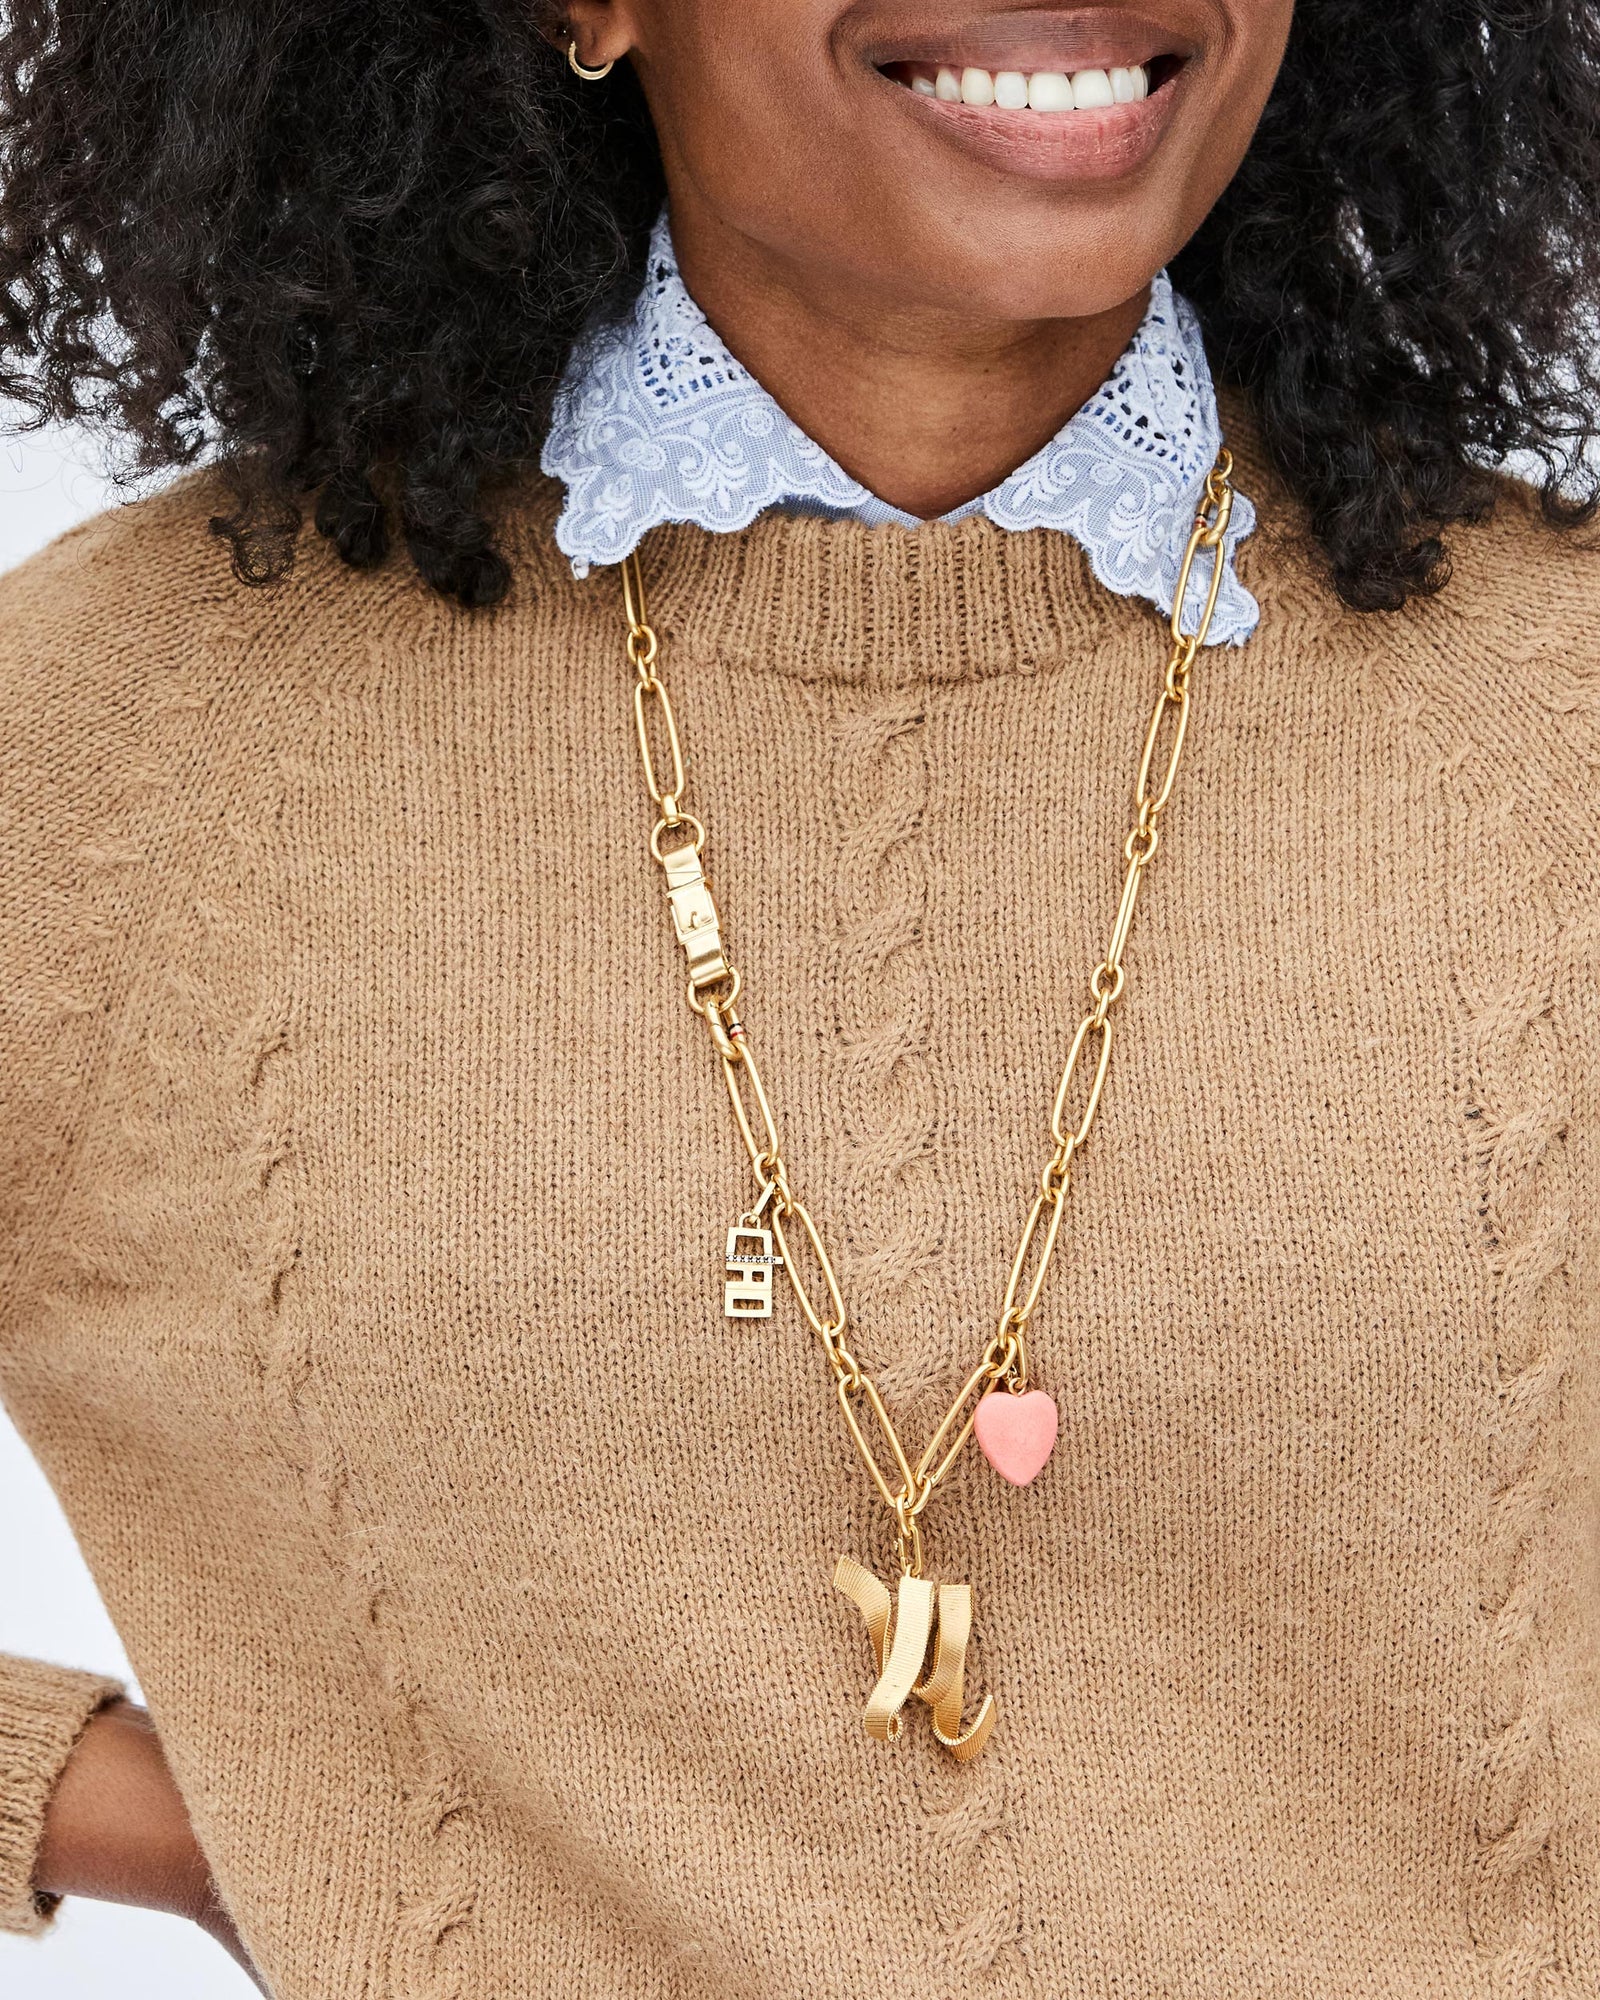 Mecca Wearing the Ciao Charm on the Convertible Chain Necklace with the Stone Heart Charm and Ribbon Letter Charm